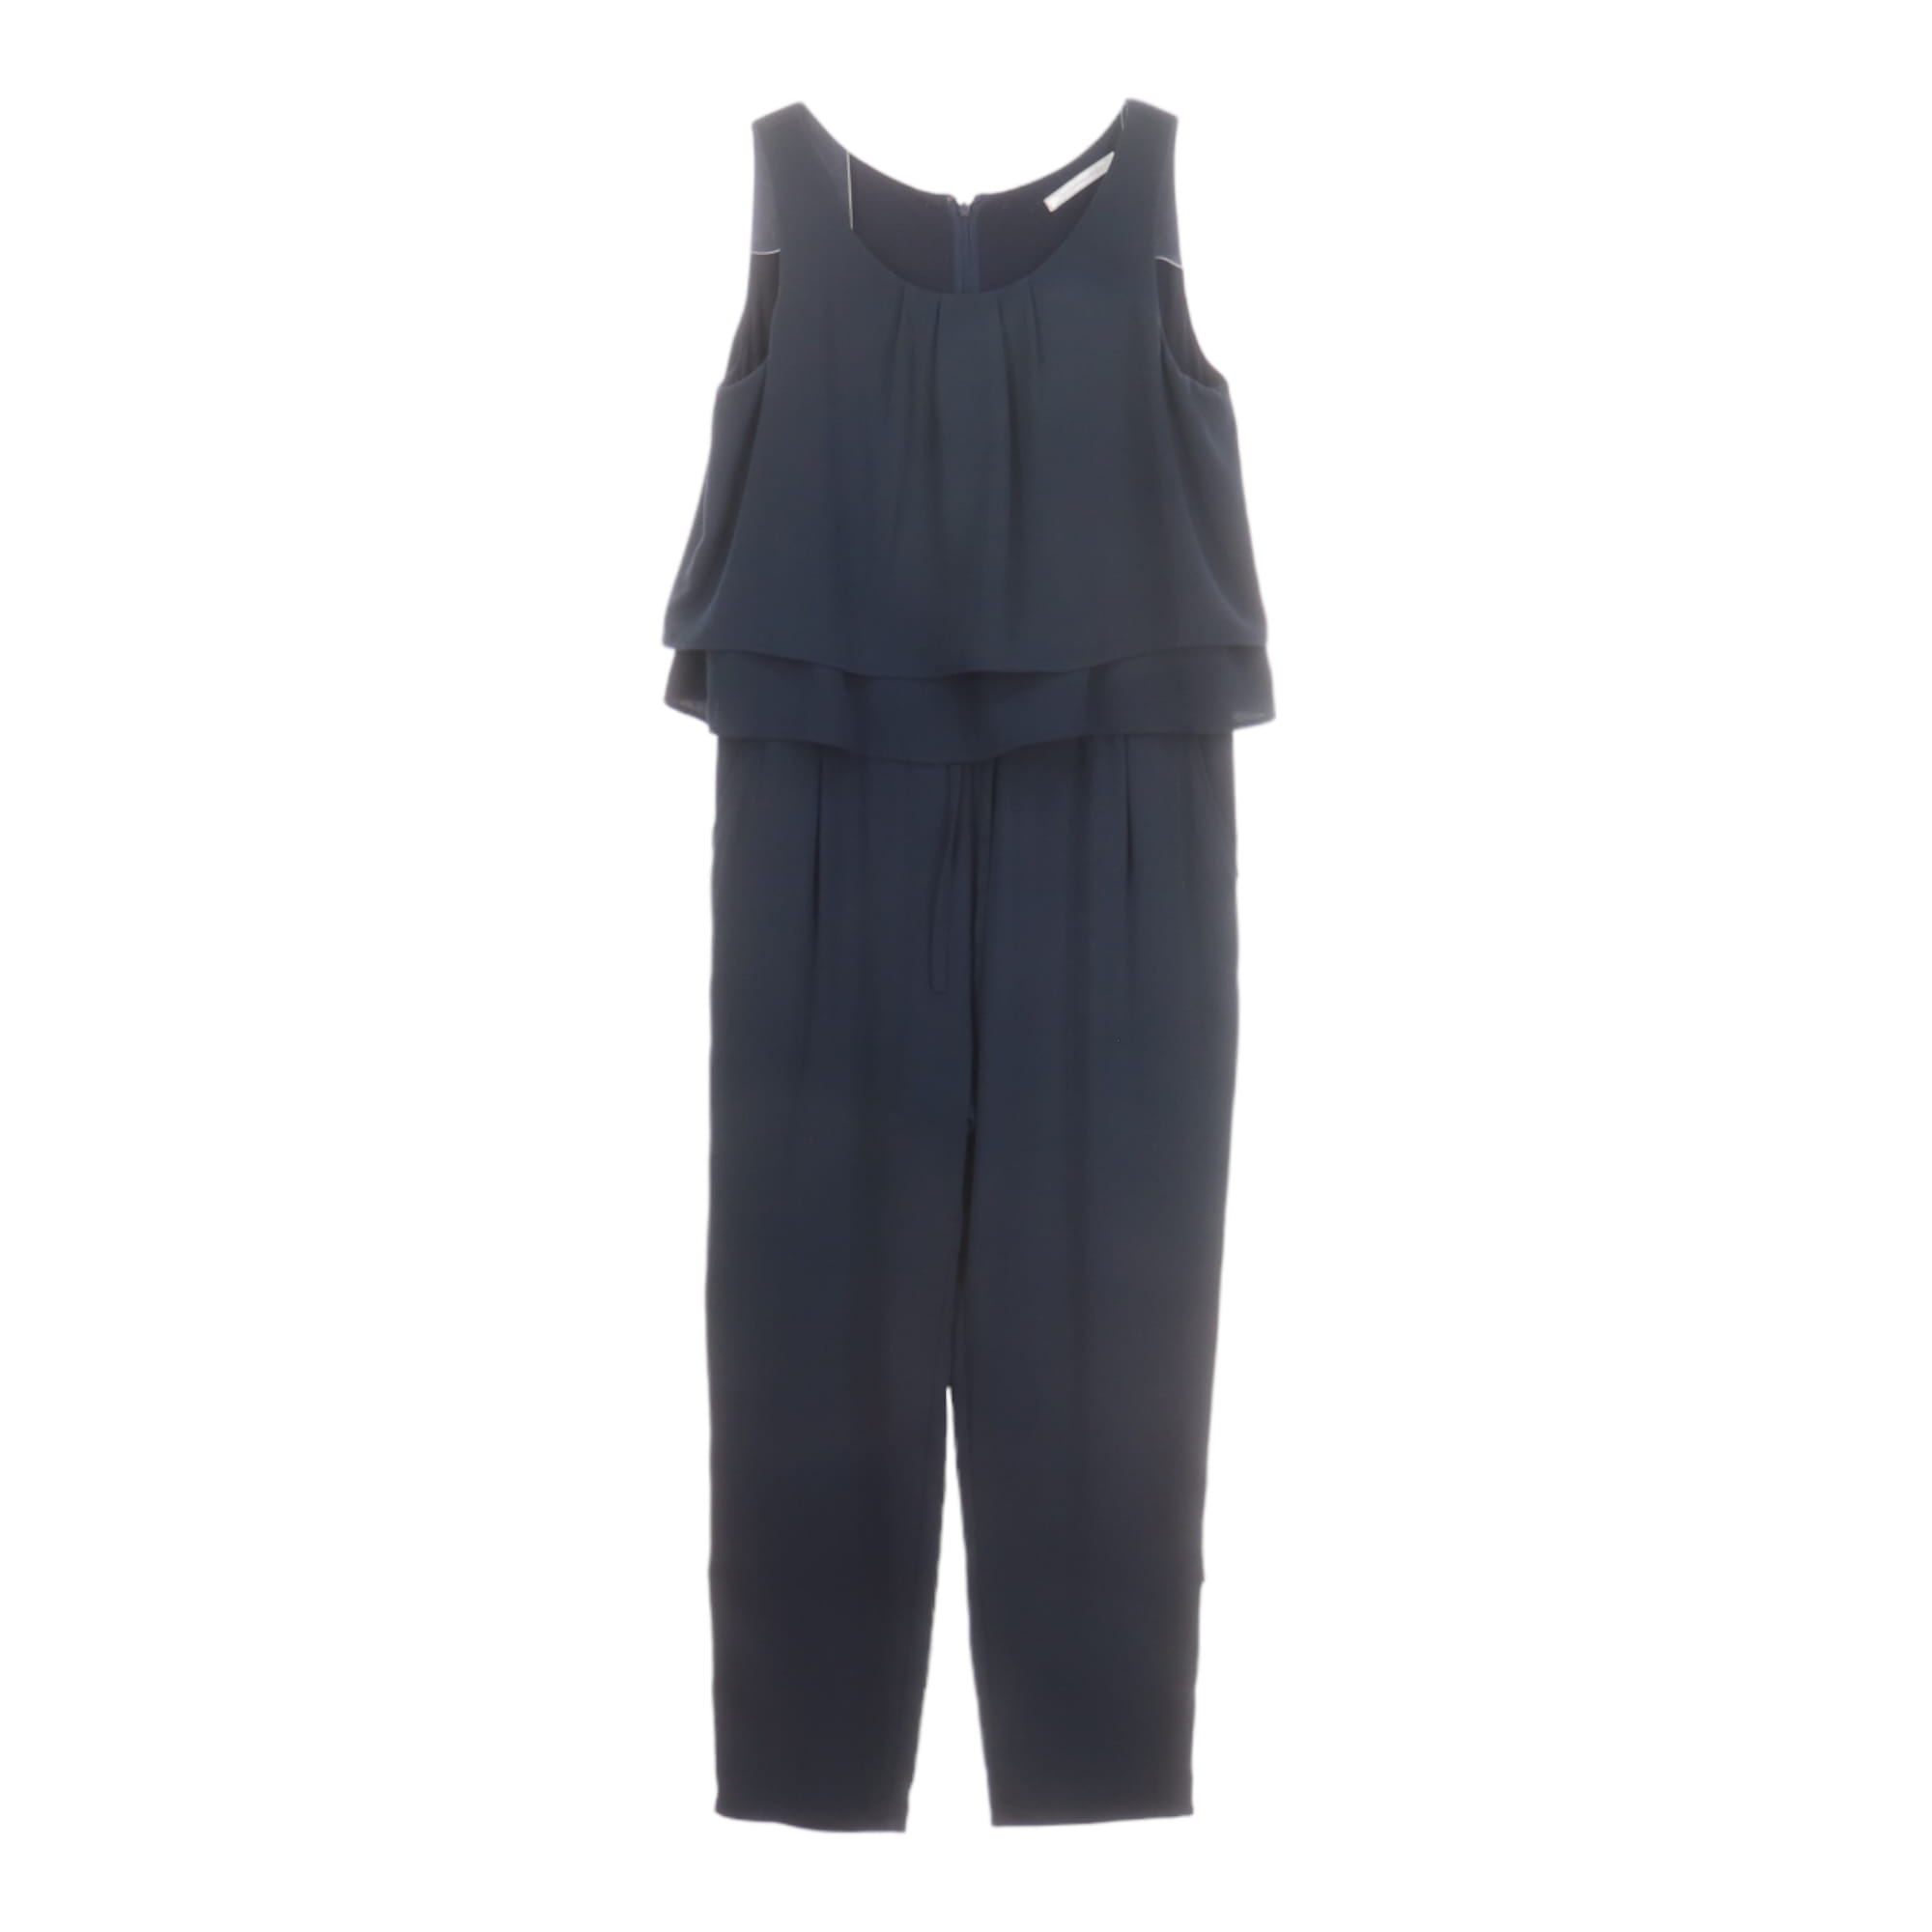 Alicia Pageboy,Overall/Jumpsuit